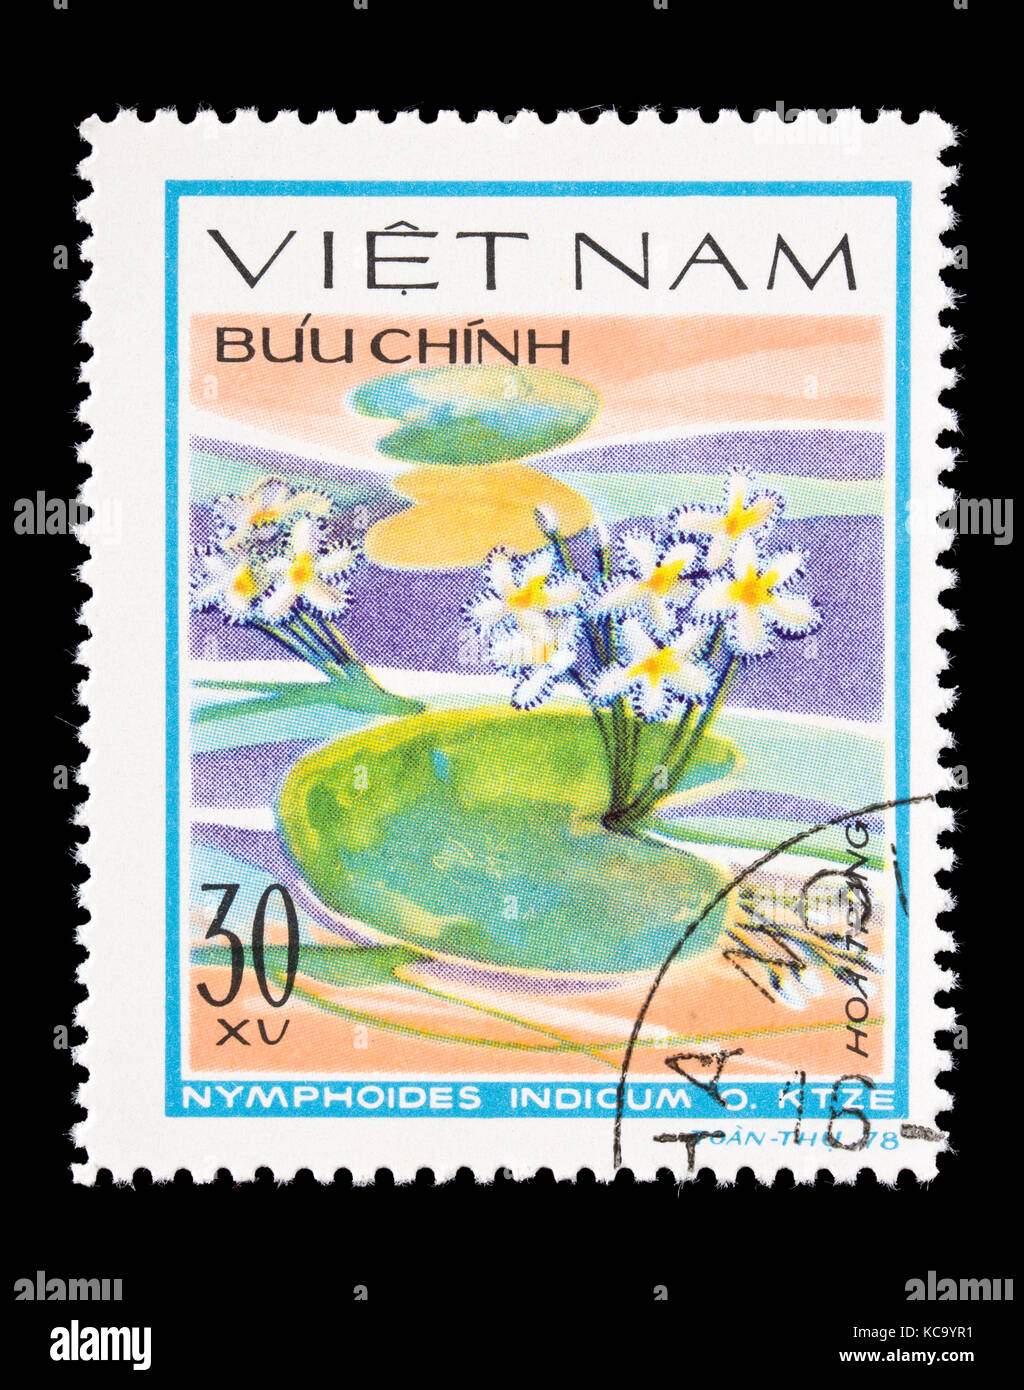 Postage stamp from Vietnam depicting a floatingheart (Nymphoides indicum) Stock Photo